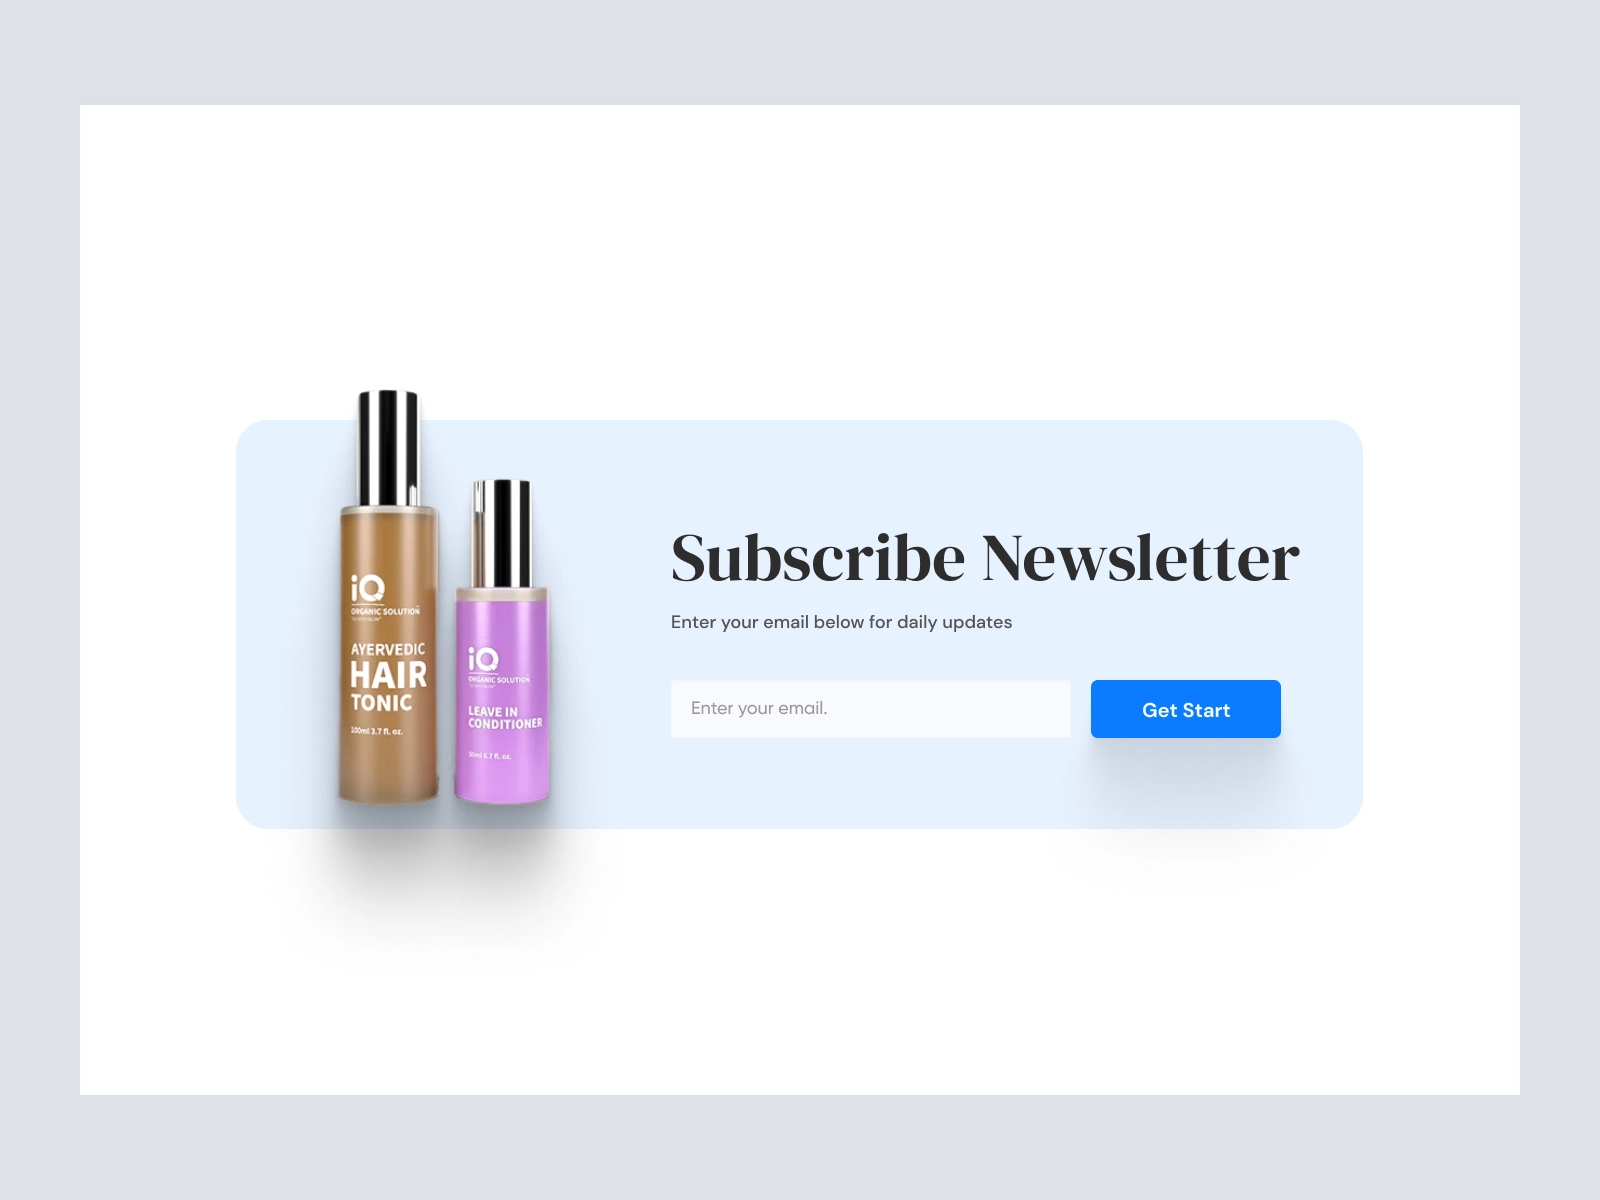 IQ - Shopify Cosmetics and Beauty Store for Figma and Adobe XD - screen 5